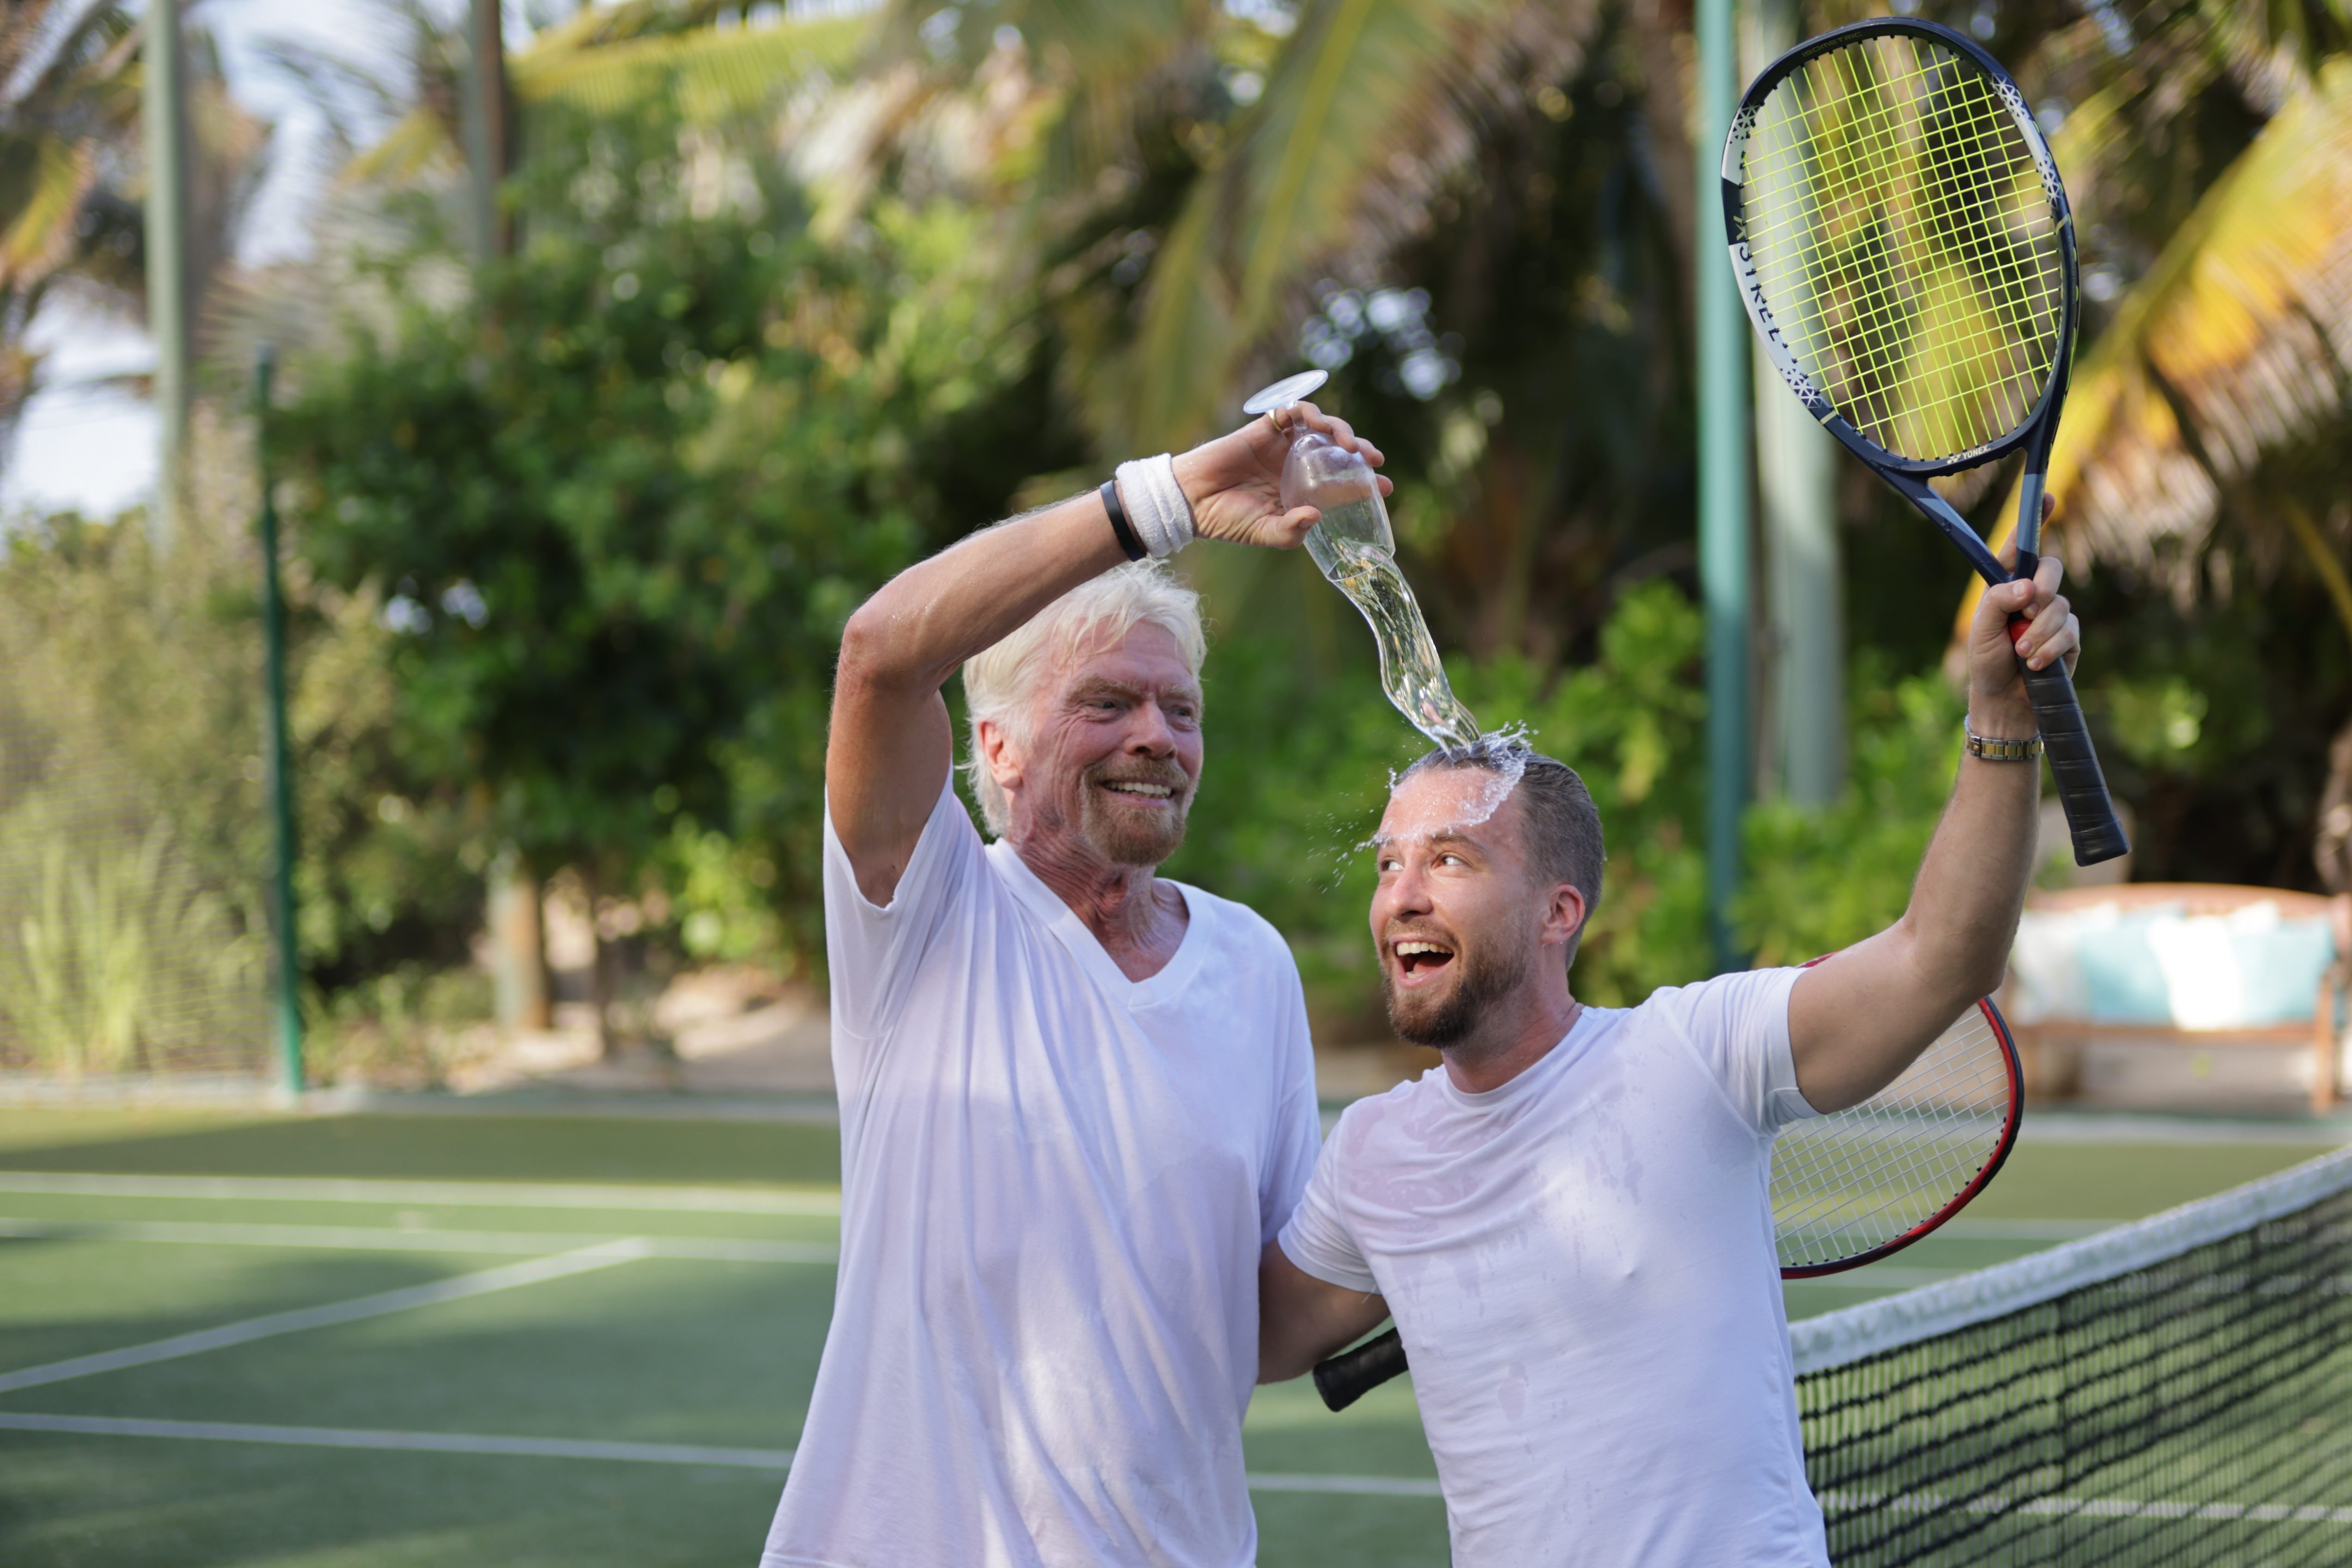 Richard Branson pouring water from a bottle over Jack Delosa with both holding tennis racquets on a tennis court